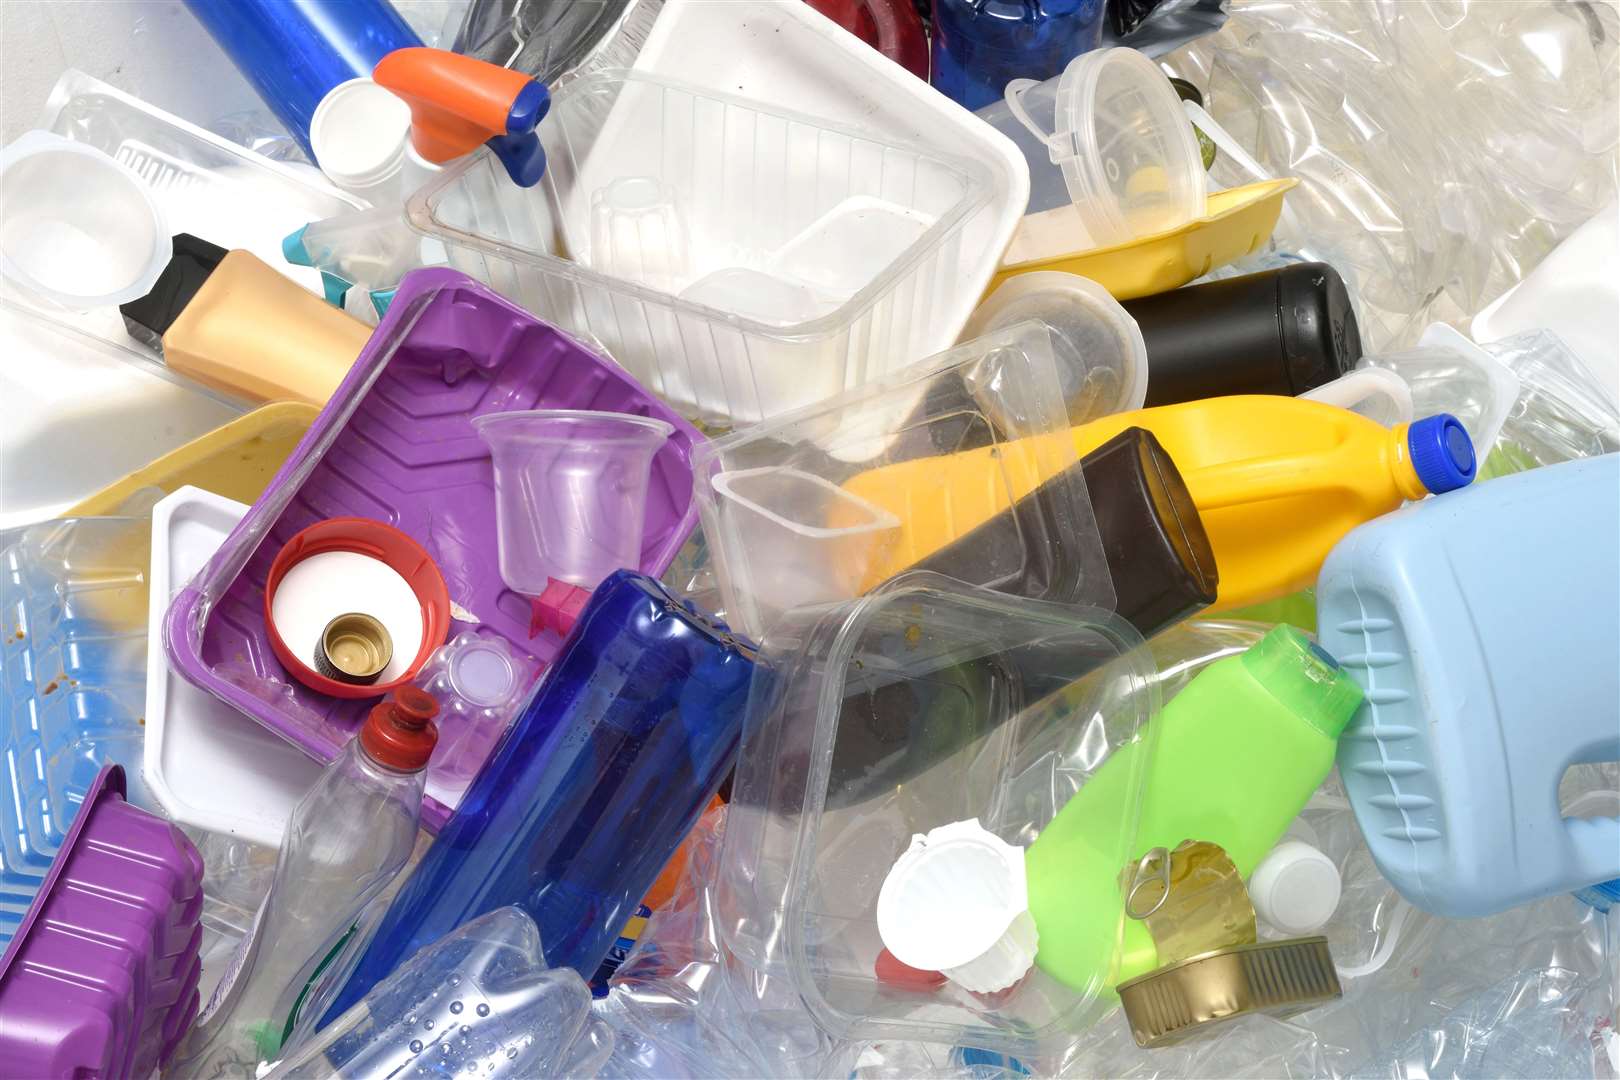 Glass bottles and jars, cartons, cardboard packaging and plastic bottles can all be recycled